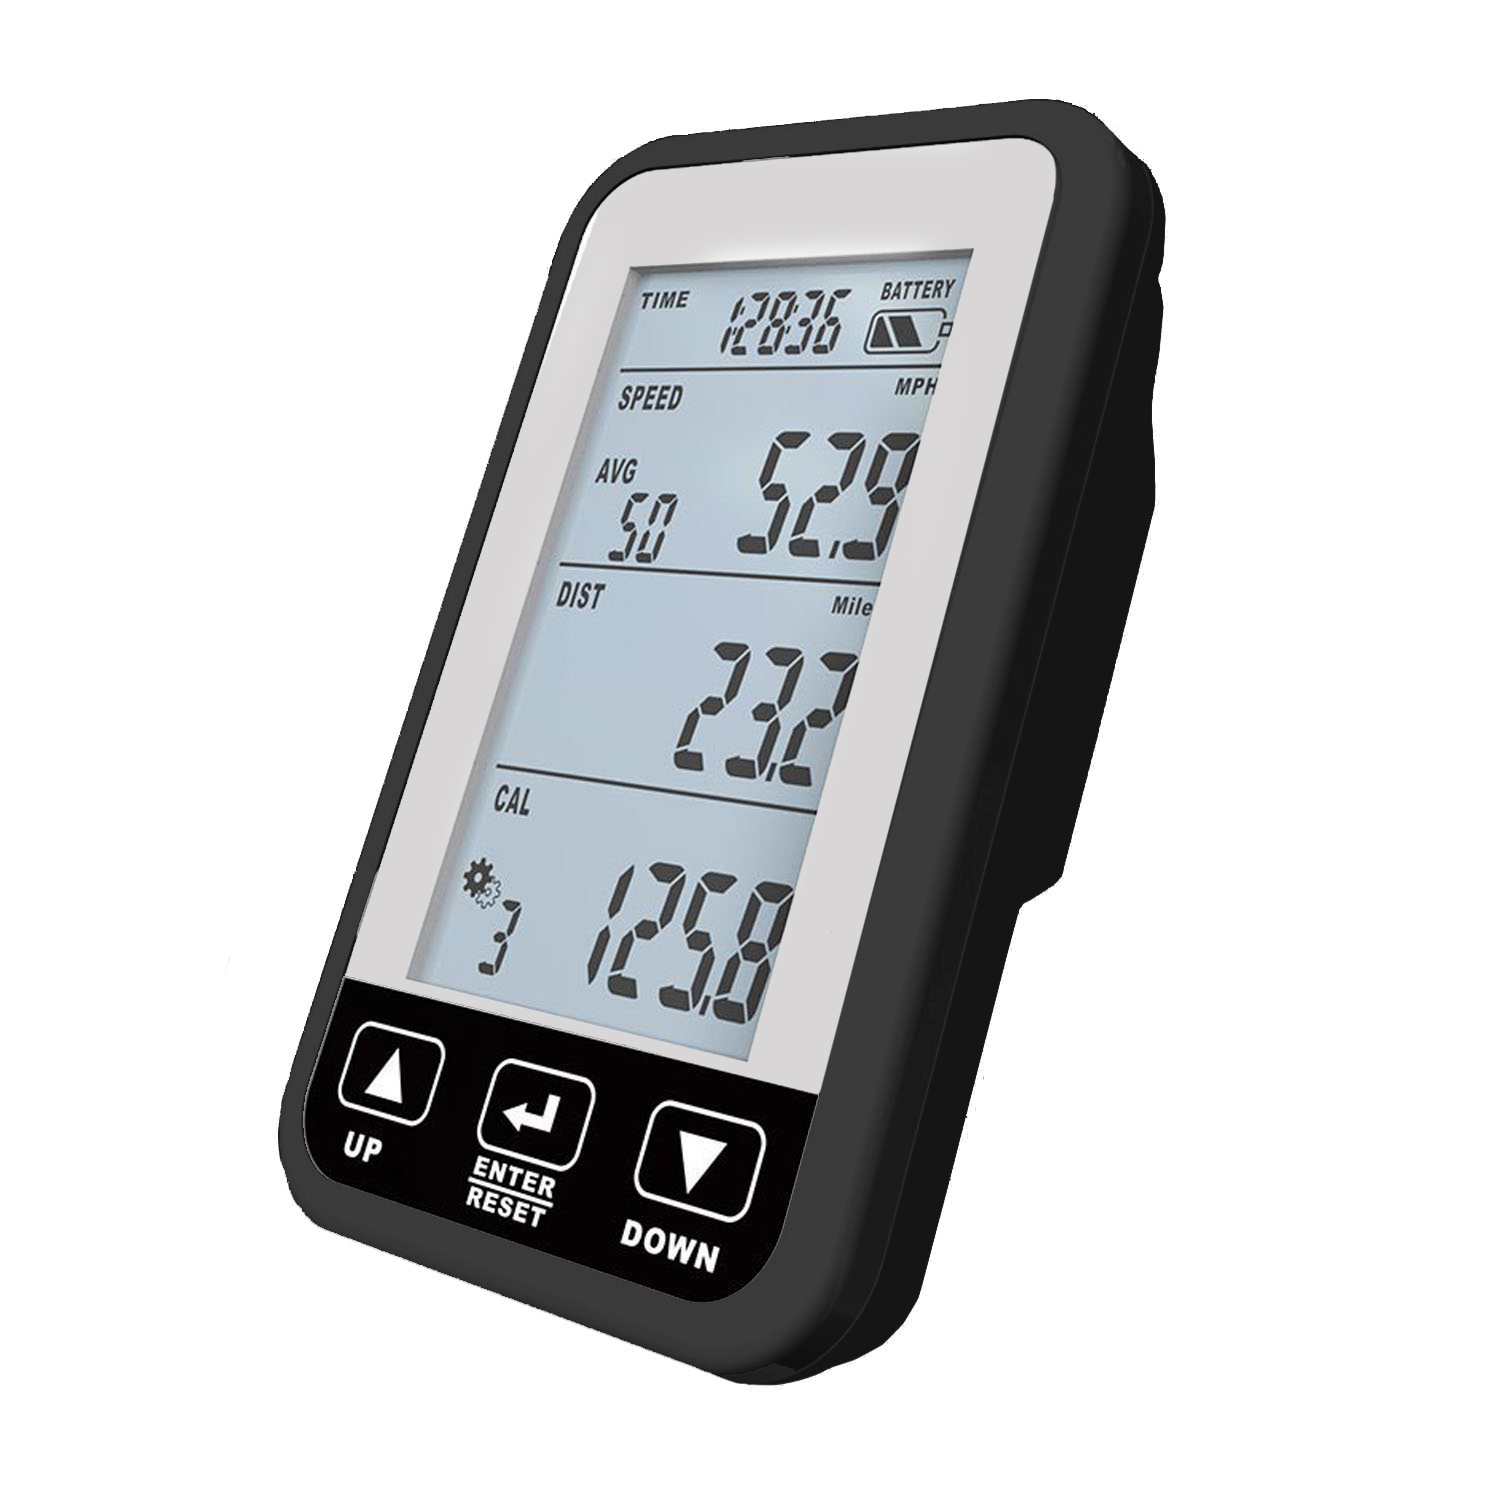 LCD display for indoor cycle